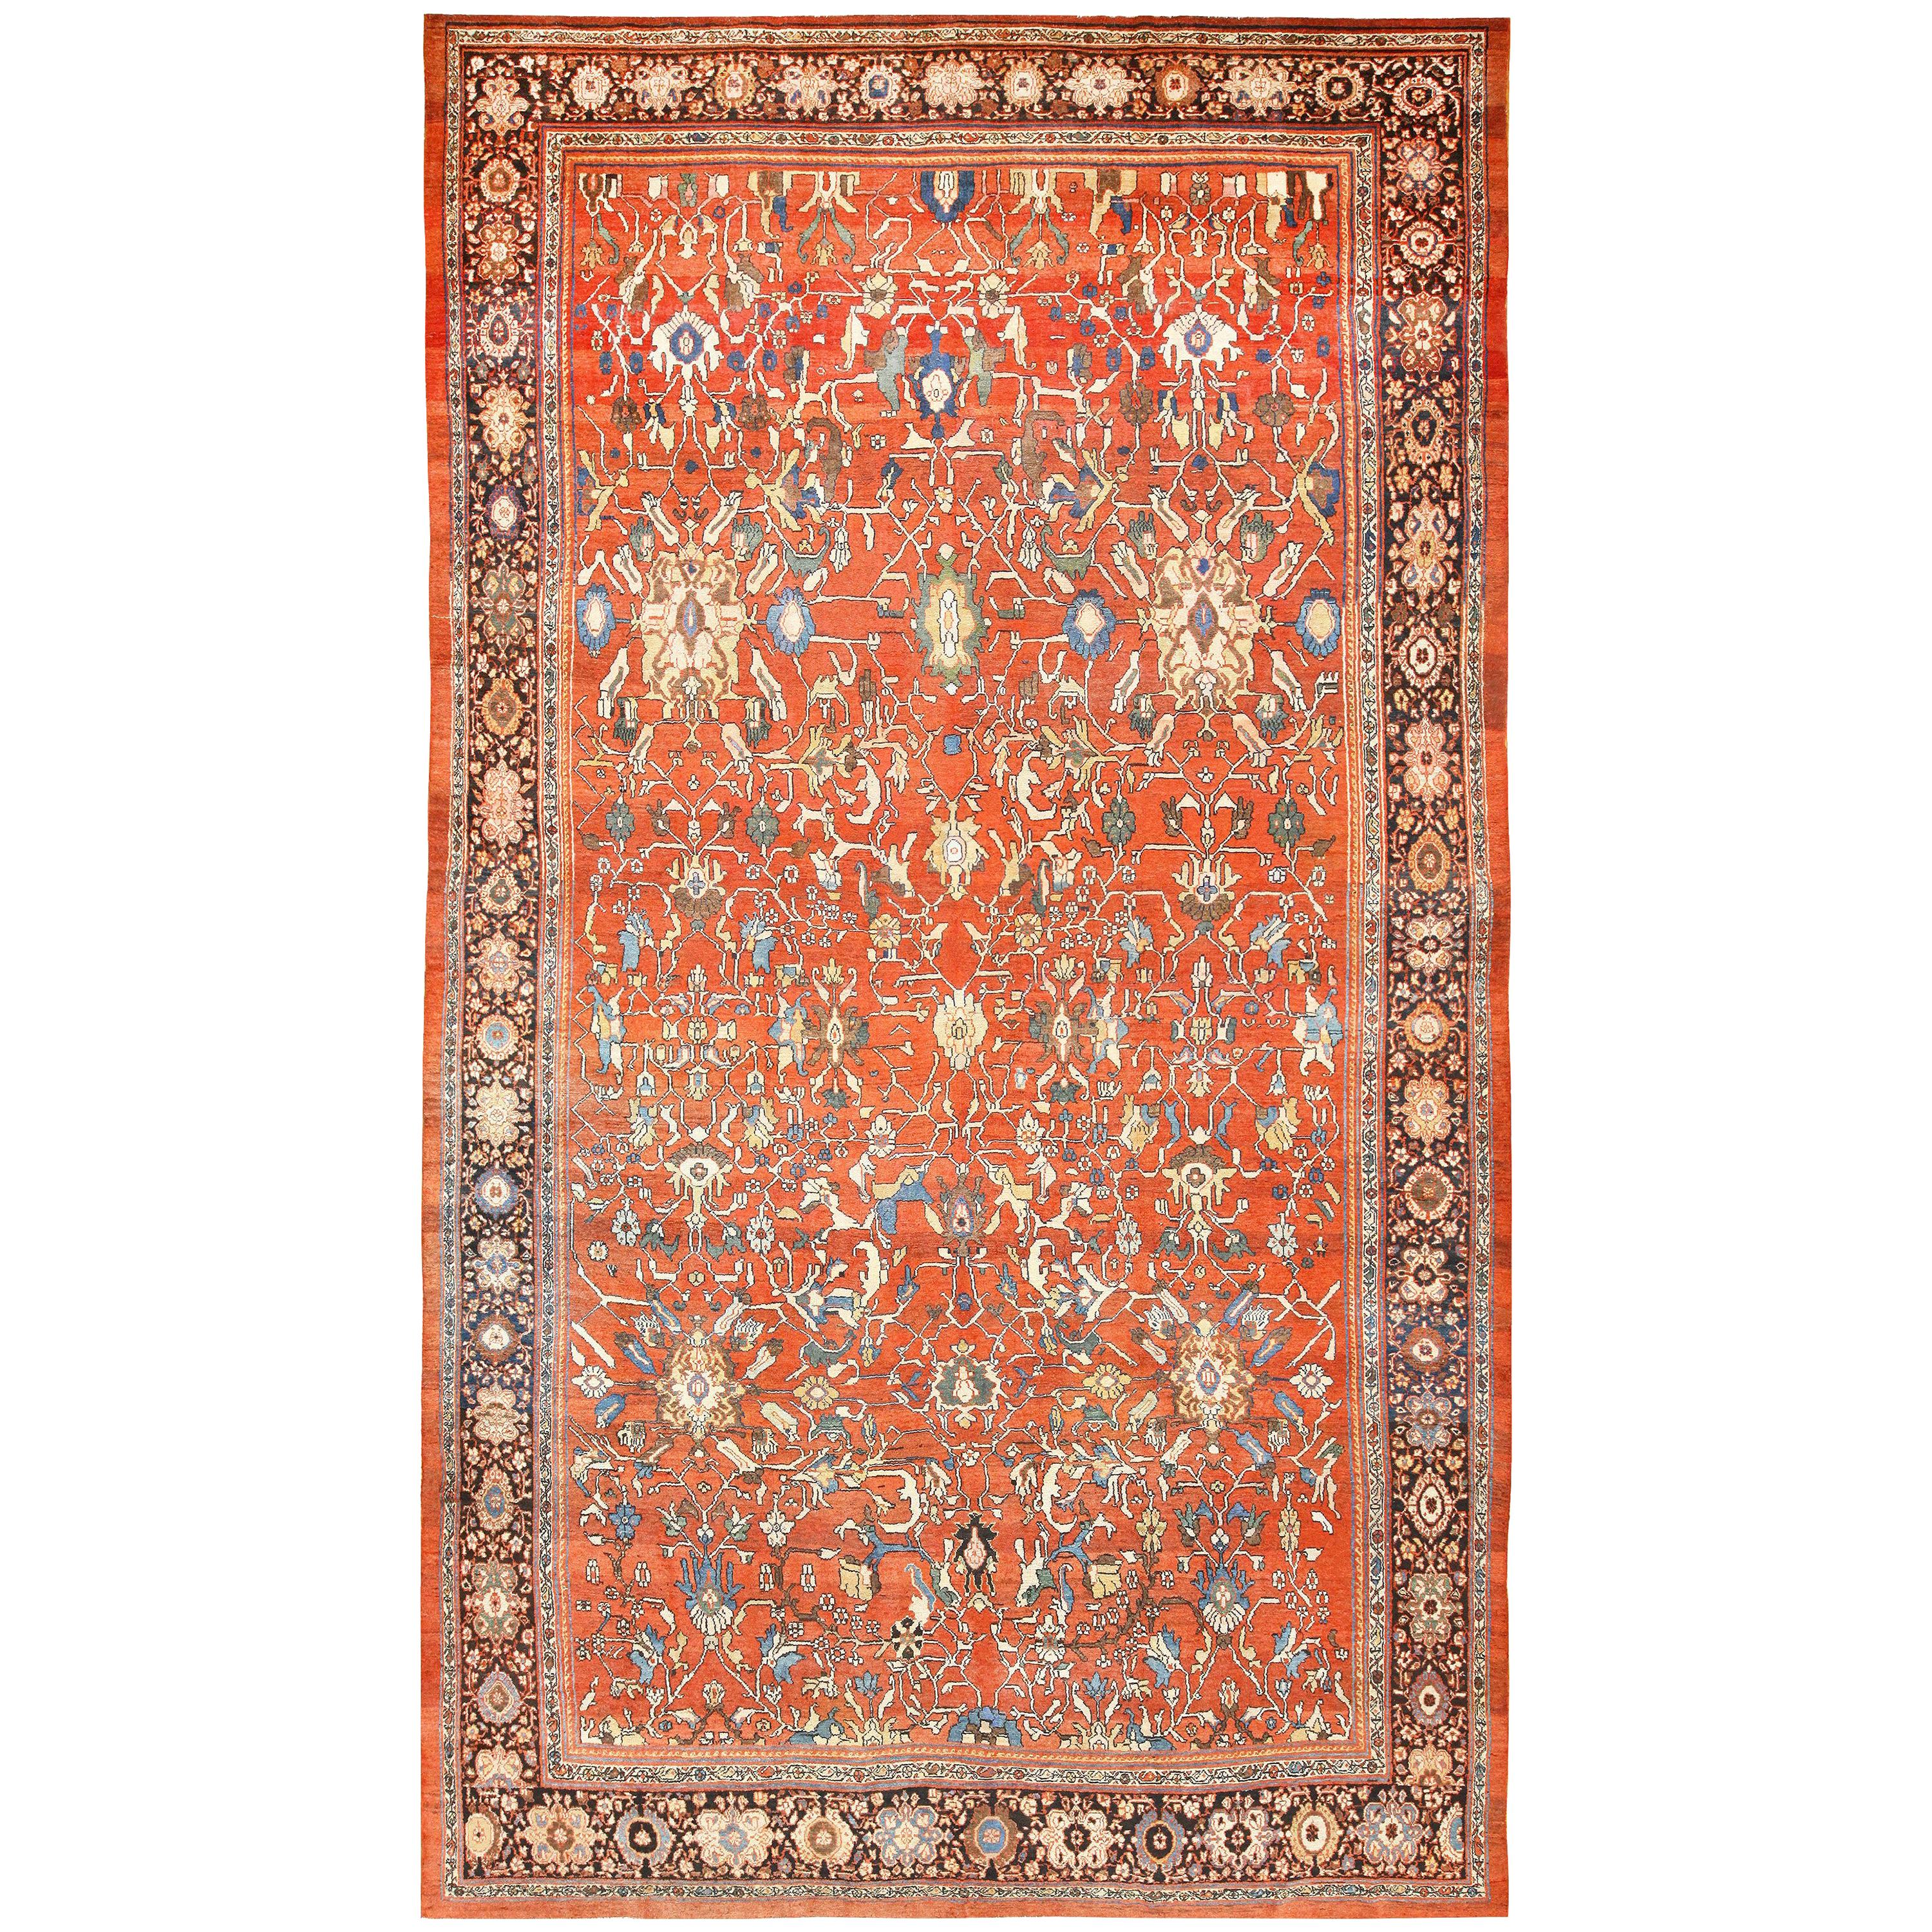 Antique Persian Sultanabad Rug. Size: 13 ft 6 in x 23 ft